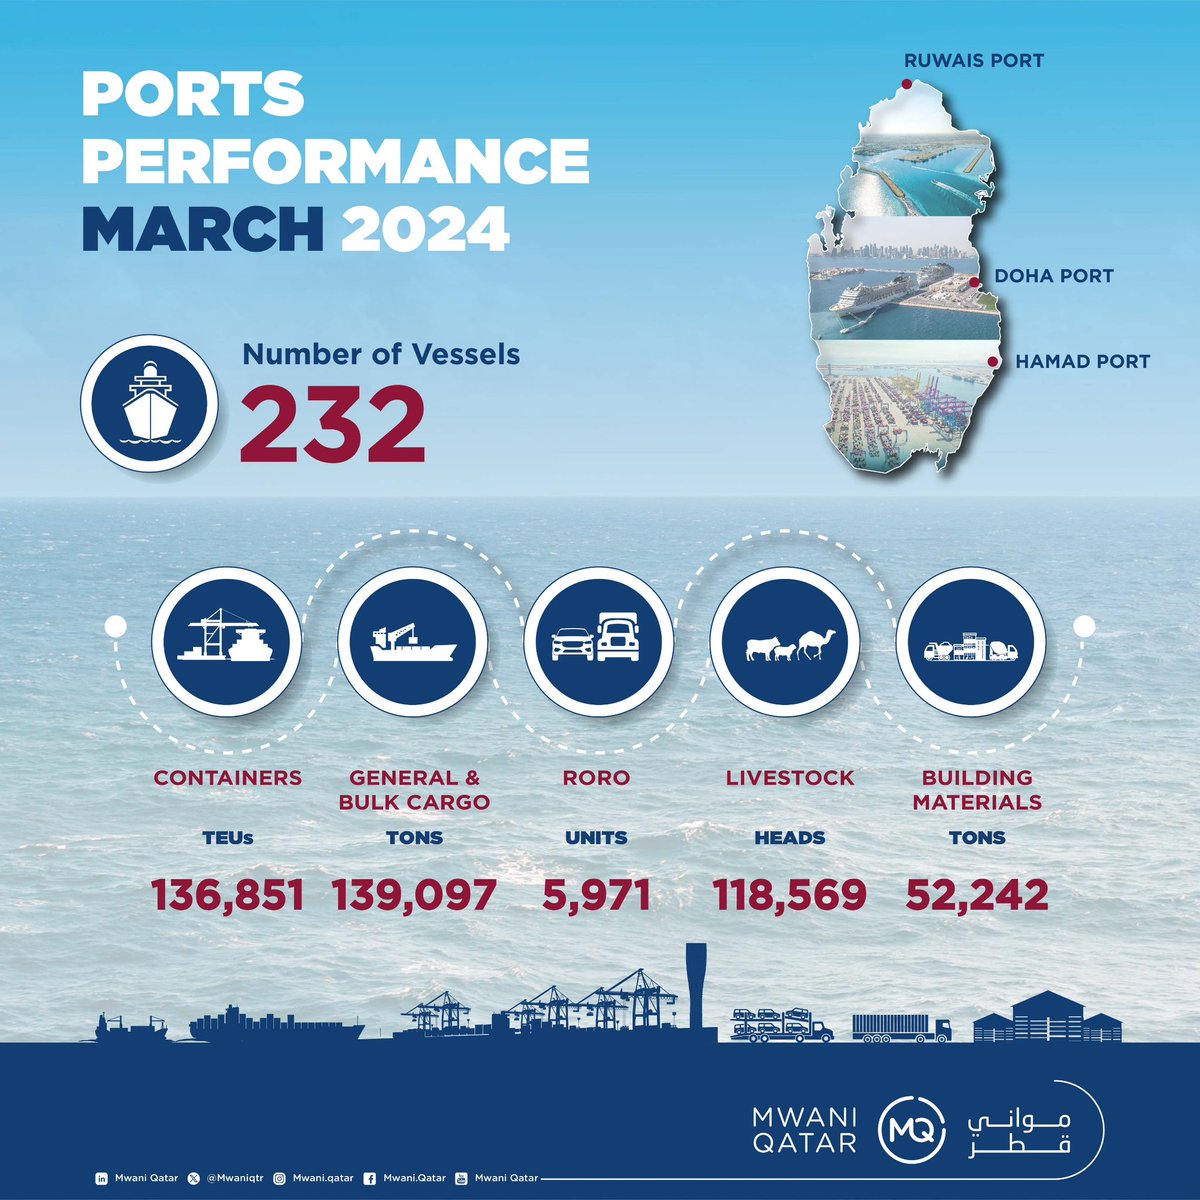 #MwaniQatar⚓️🚢 ports received 232 vessels in March 2024, 17% higher than February 2024. Container🏗️ handling increased by 23%, while livestock and building materials volumes increased by 66% and 28%, respectively. #HamadPort #DohaPort #RuwaisPort #Qatar🇶🇦